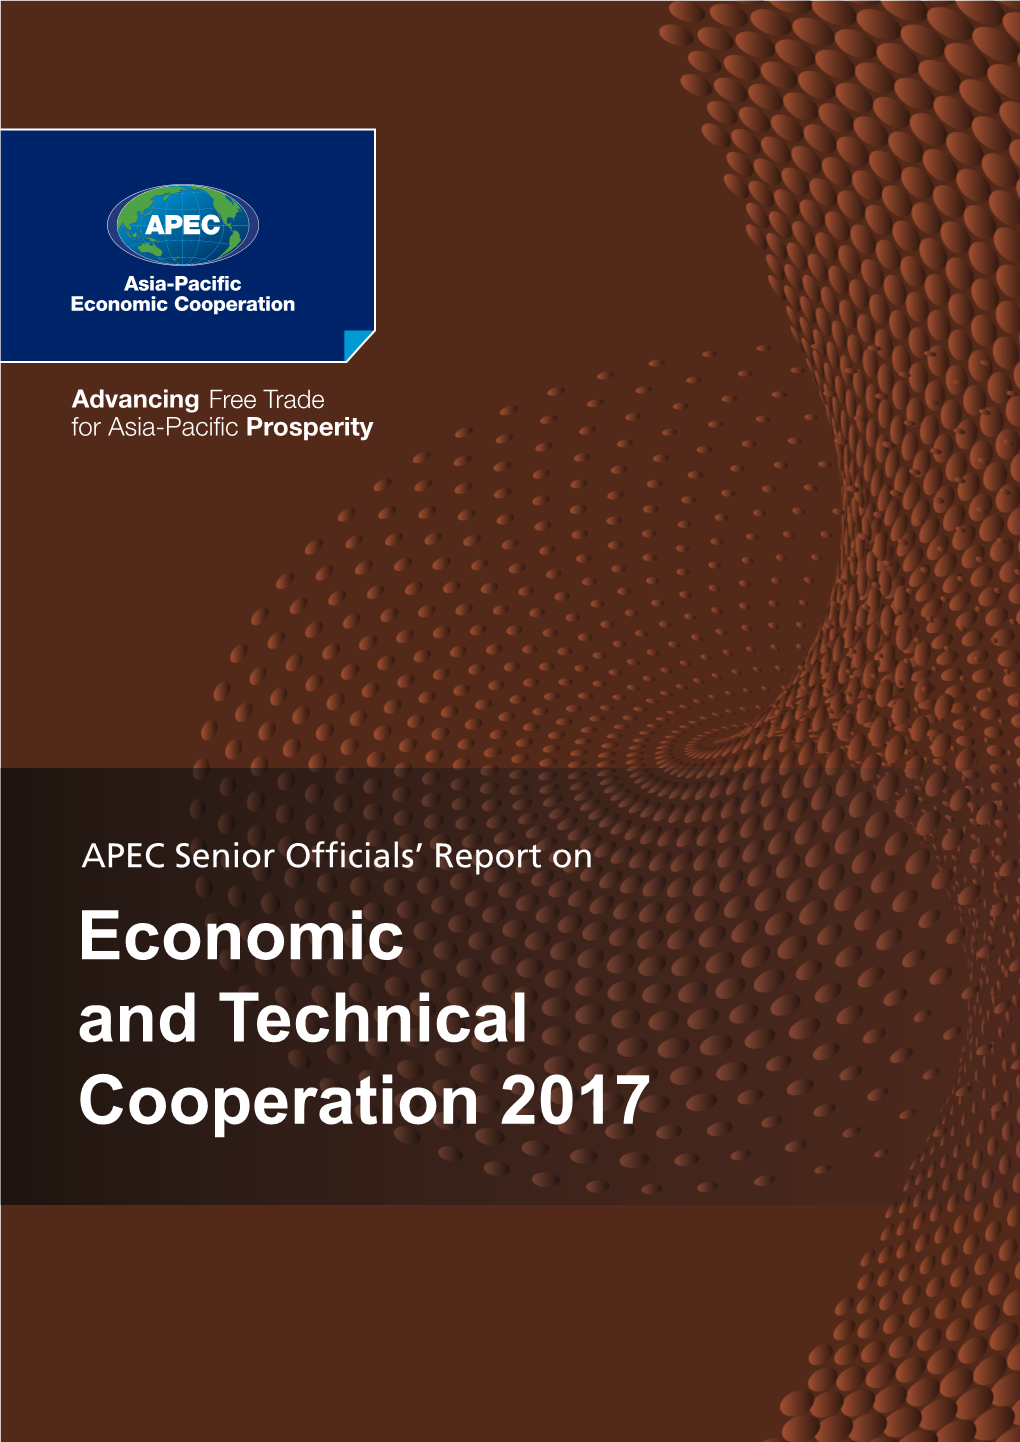 Economic and Technical Cooperation 2017